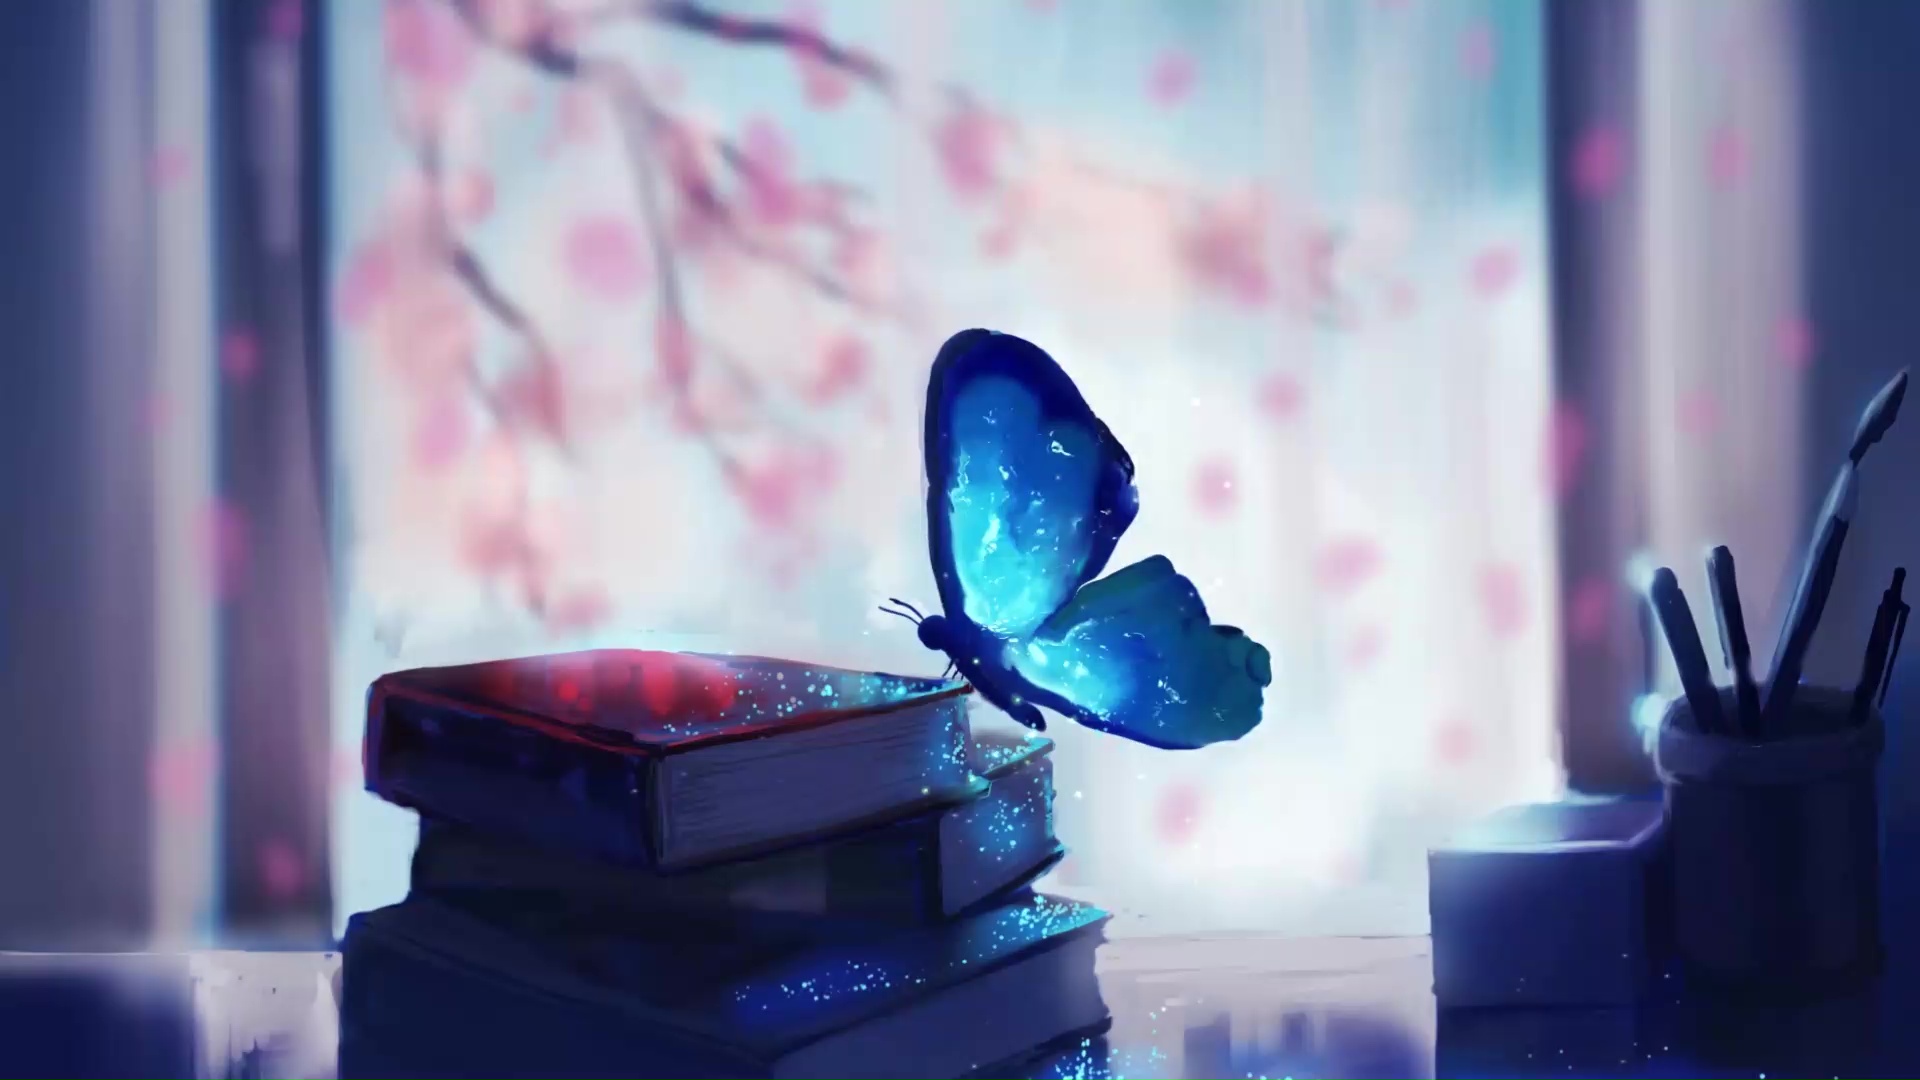 Blue butterfly wallpaper by Lessthenkt  Download on ZEDGE  dc5f